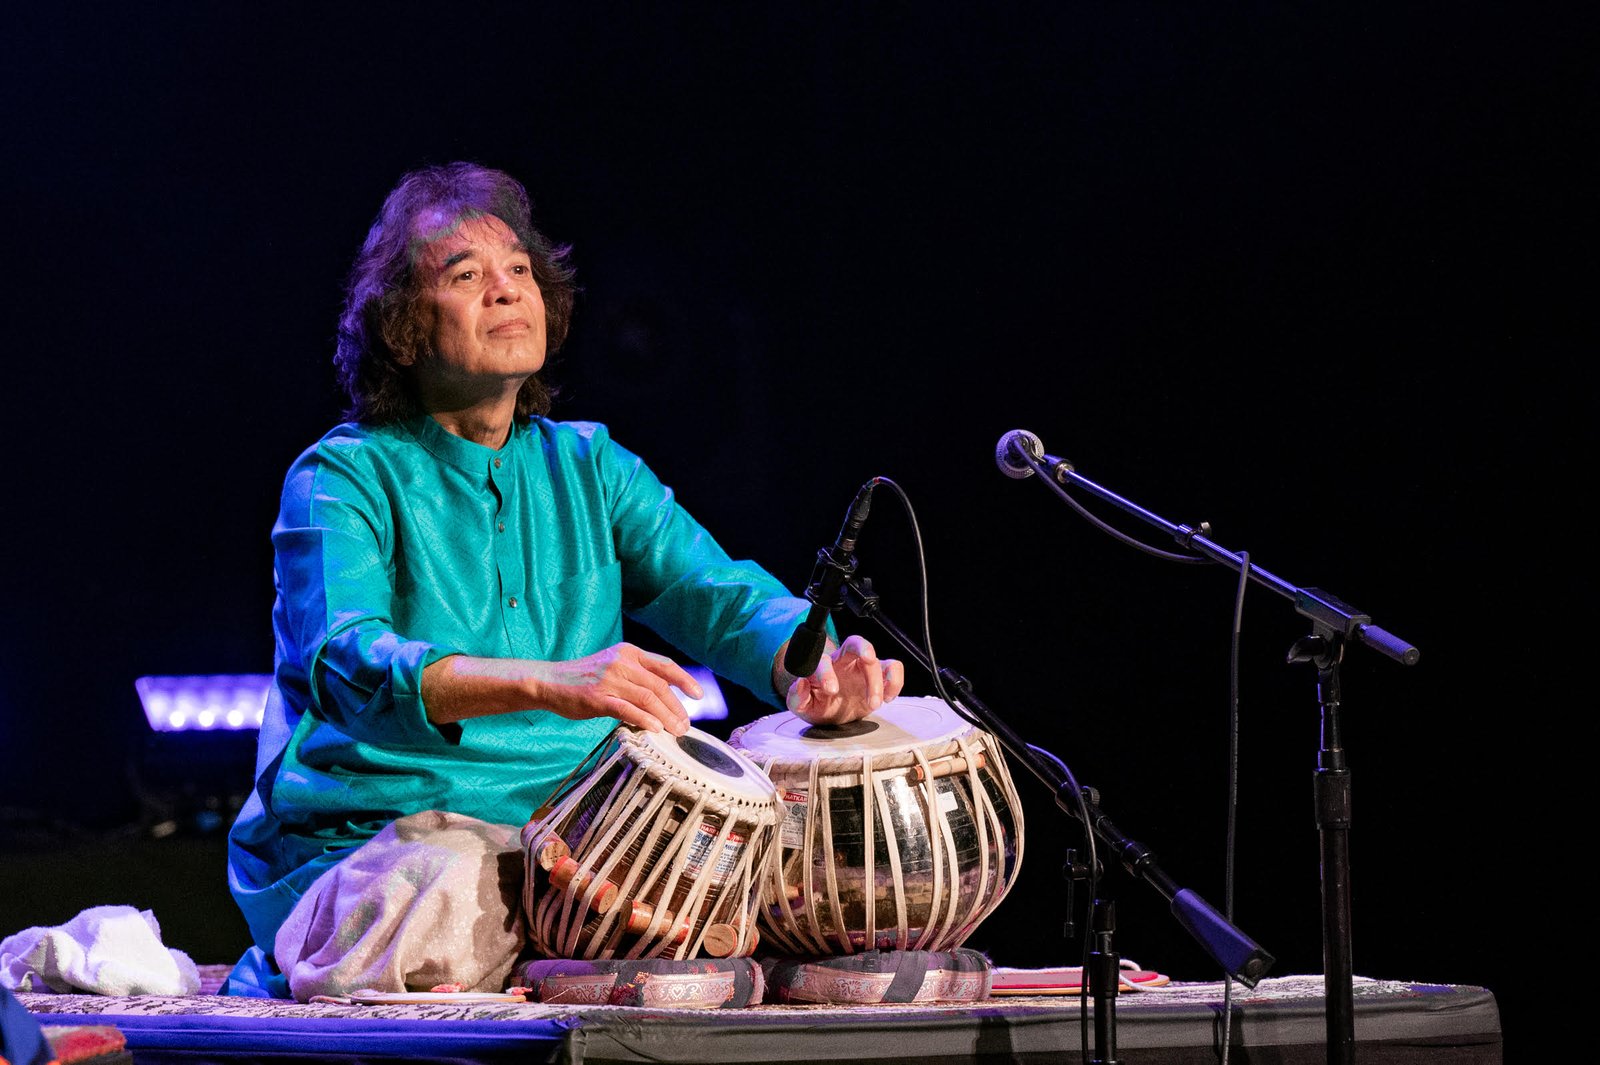 For-Zakir-Hussain-The-Tabla-Is-Of-His-Flesh-And-Blood-An-Extension-Of-His-Being-IndiaWest-India-West